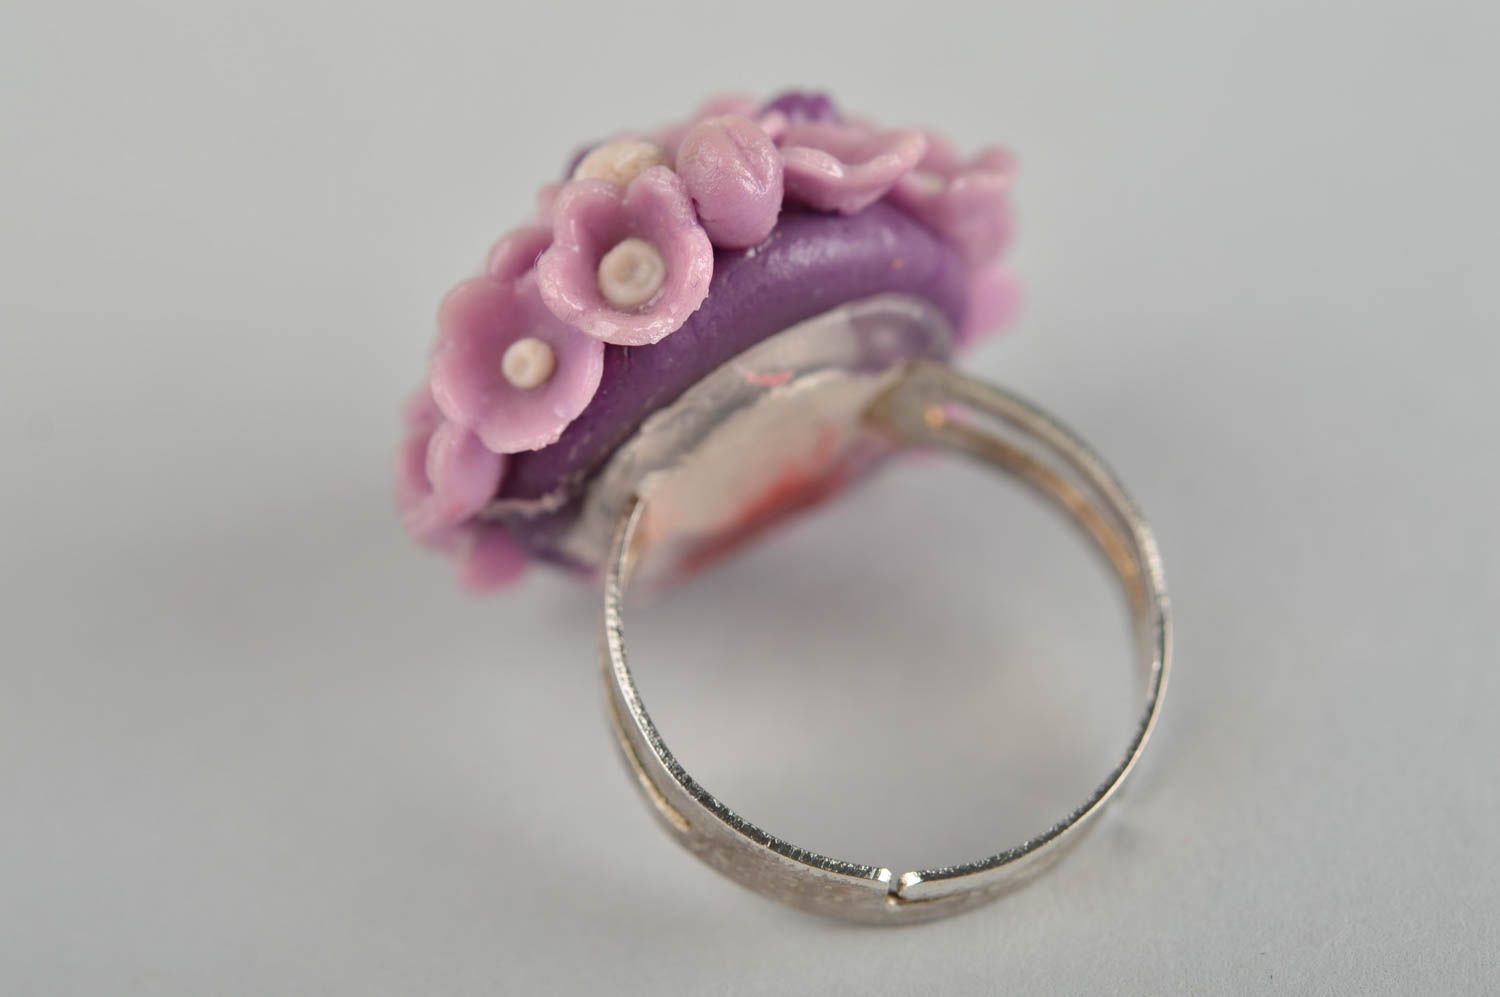 Unusual handmade flower ring plastic ring design polymer clay ideas small gifts photo 6